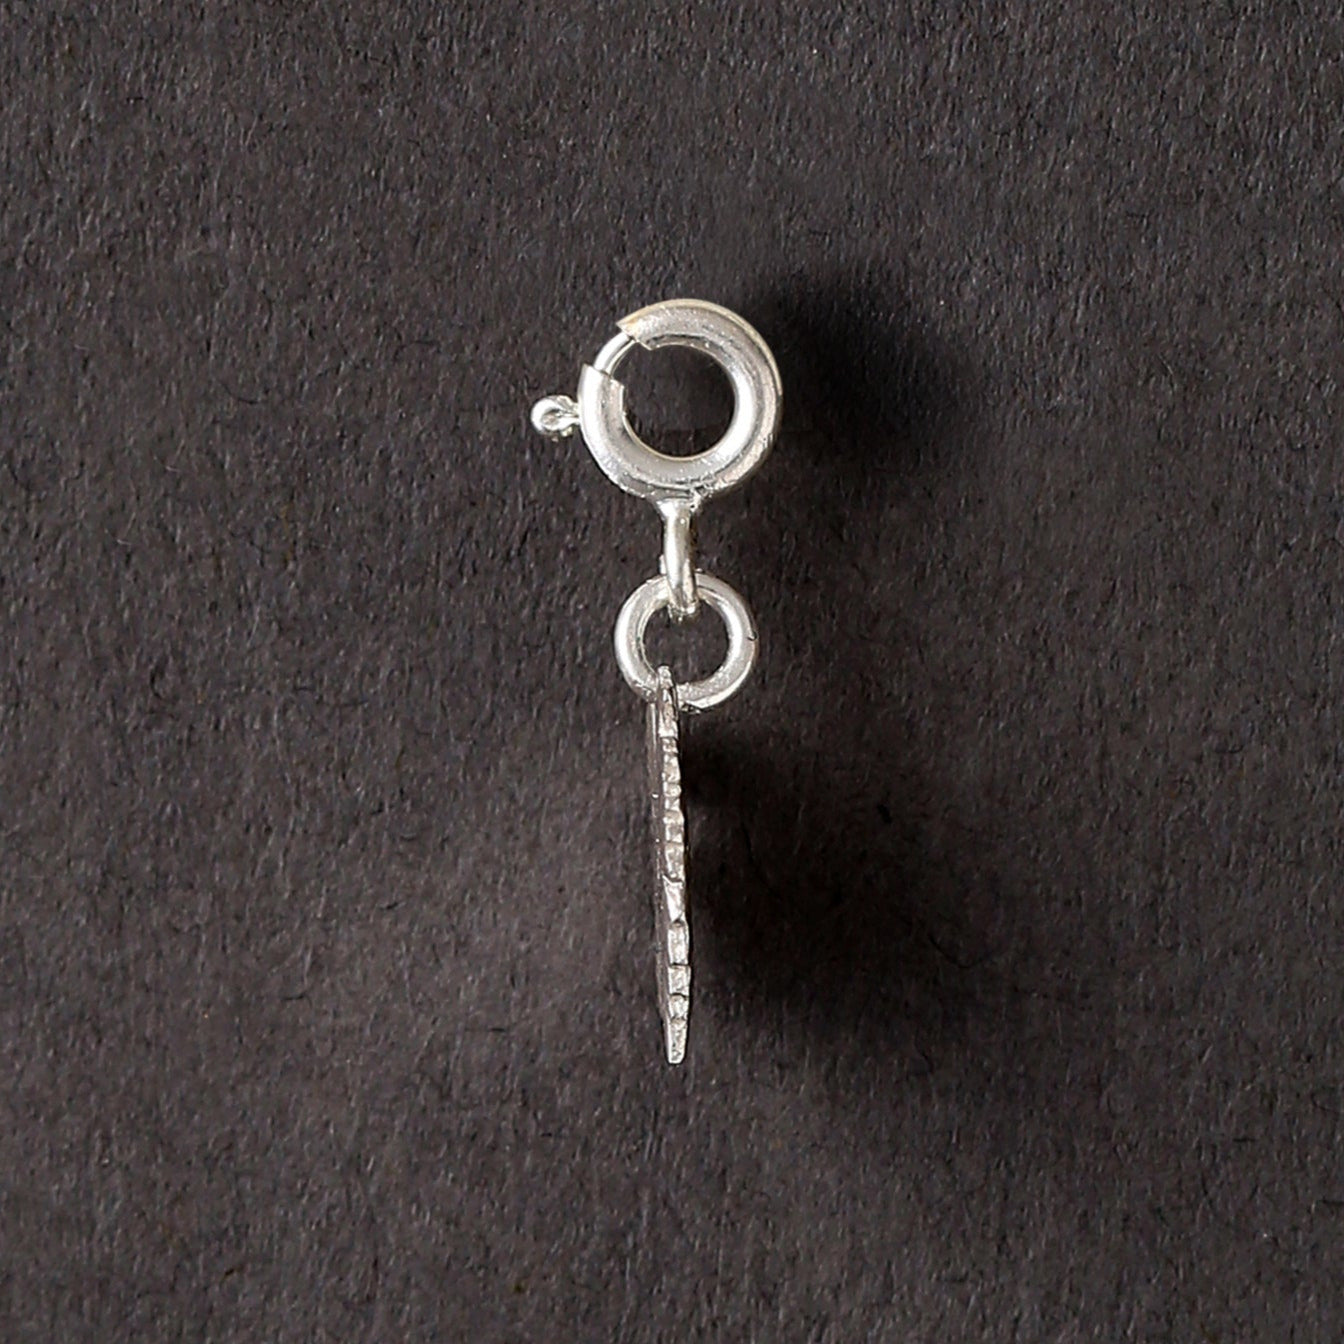 Detachable Ivy Charm with delicate ring clasp